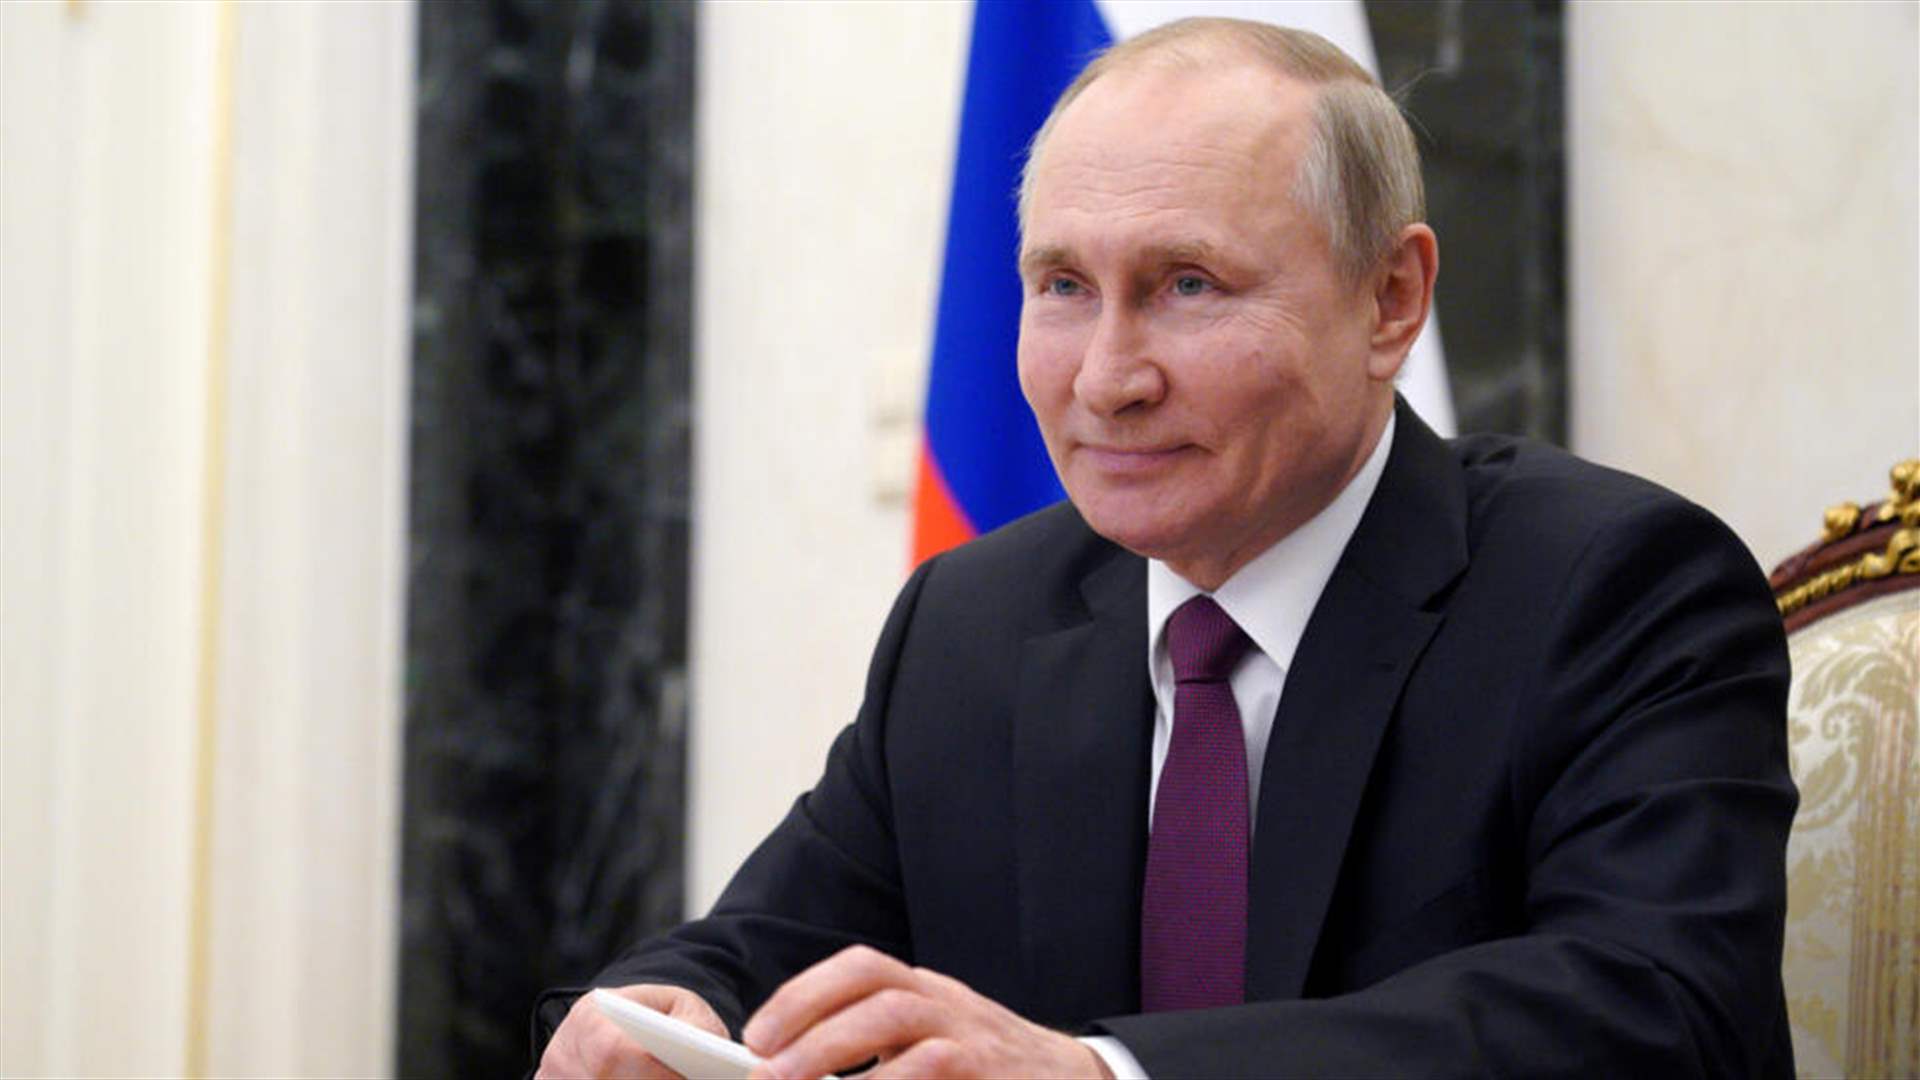 Putin says Russia does not need to use nuclear weapons for victory in Ukraine